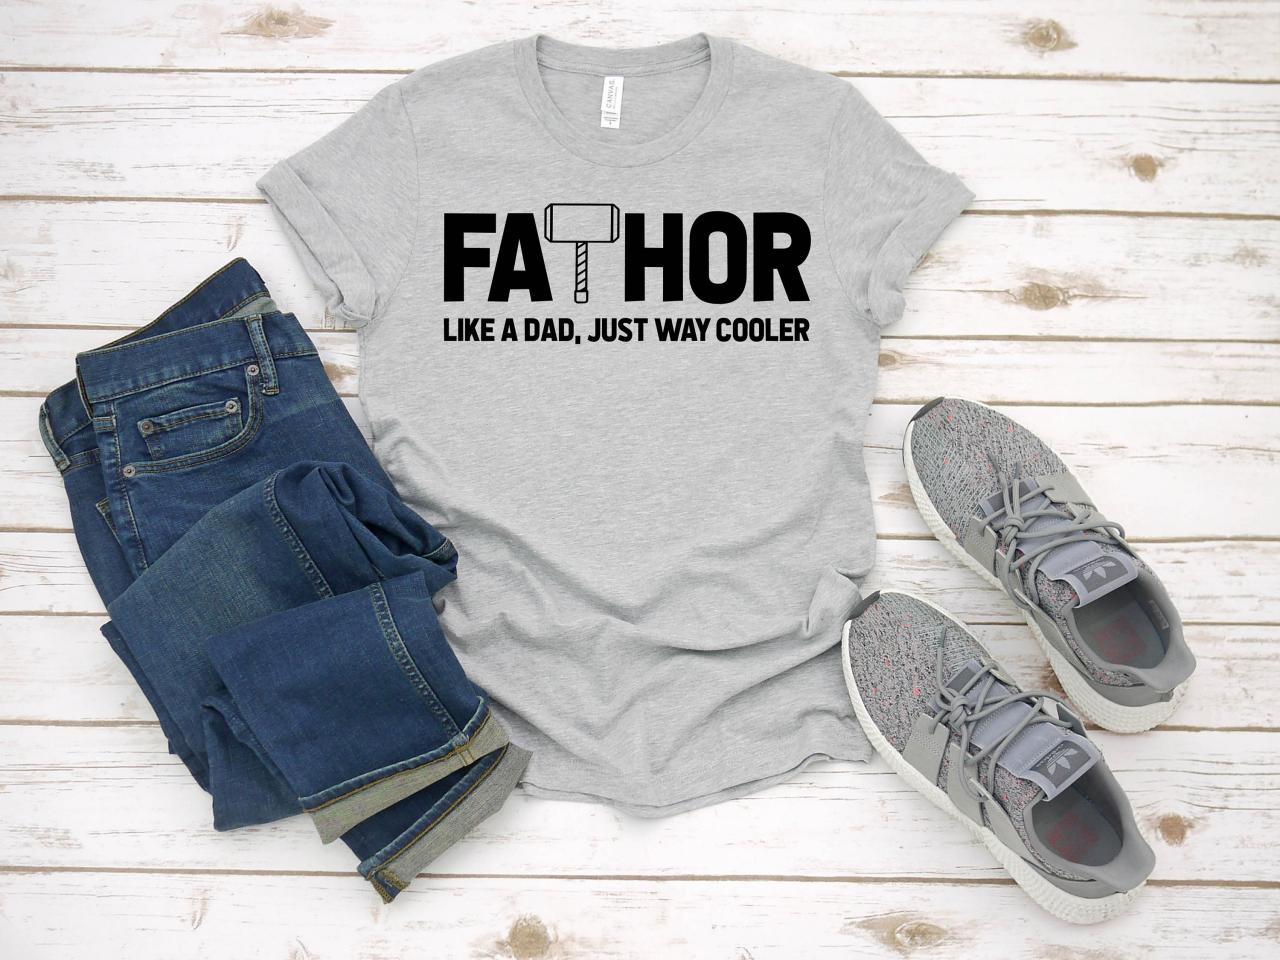 Men T-shirt | Father Day Gift T-shirt| Unique Father Gift Thor| Fathor Funny Gift For Dad| Fathers Day Gift